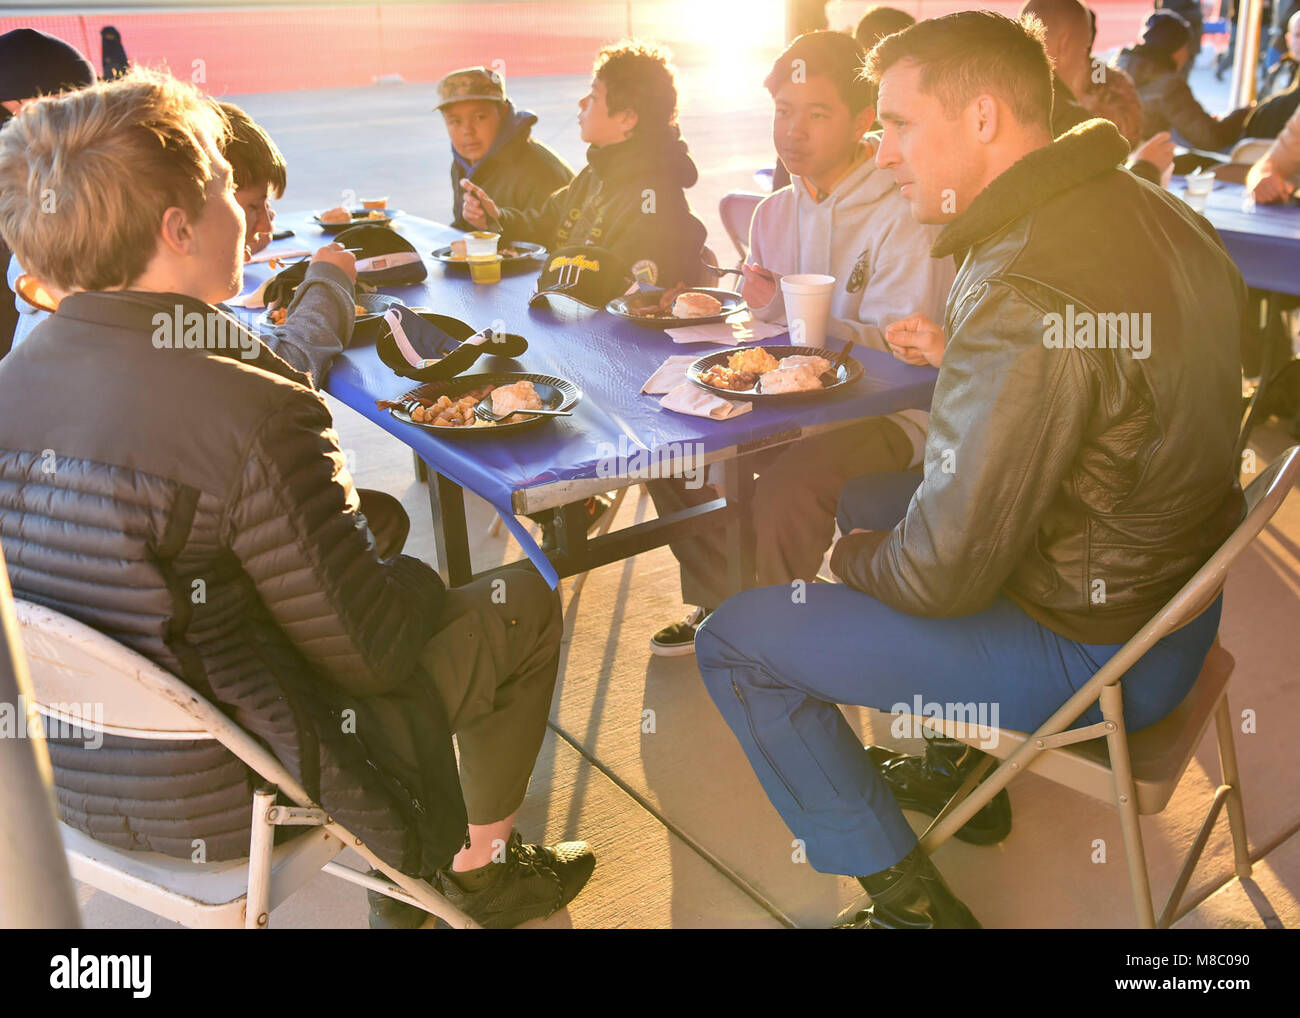 NAF EL CENTRO, Calif. (Feb. 24, 2018) Blue Angels Left Wing Pilot, Maj. Jeff Mullins, speaks with local Boy Scouts during a breakfast event at NAF El Centro. The Blue Angels are scheduled to perform more than 60 demonstrations at more than 30 locations across the U.S. in 2018. (U.S. Navy Stock Photo